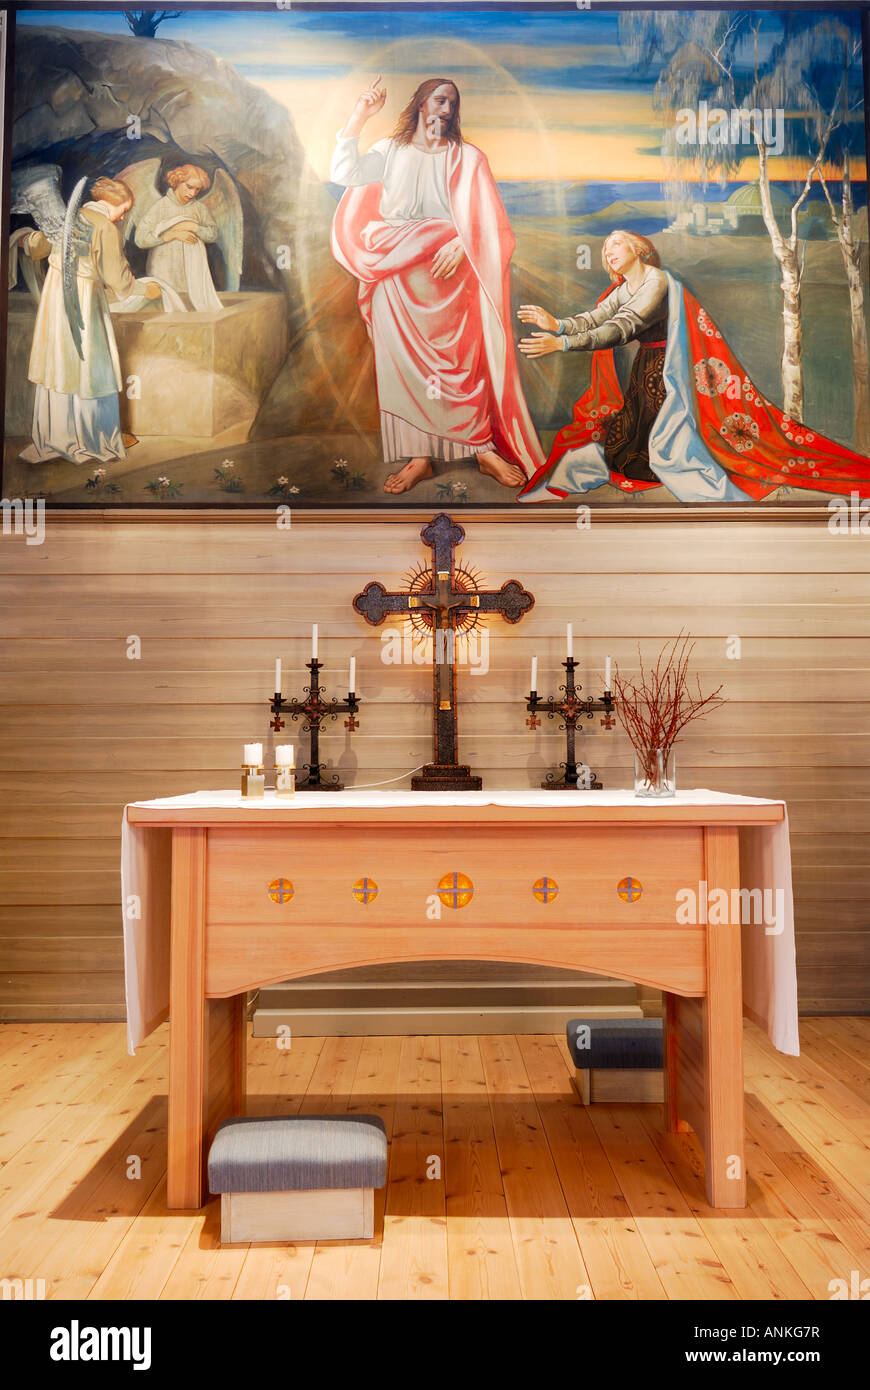 Interior of church altar and mural of Jesus Stock Photo